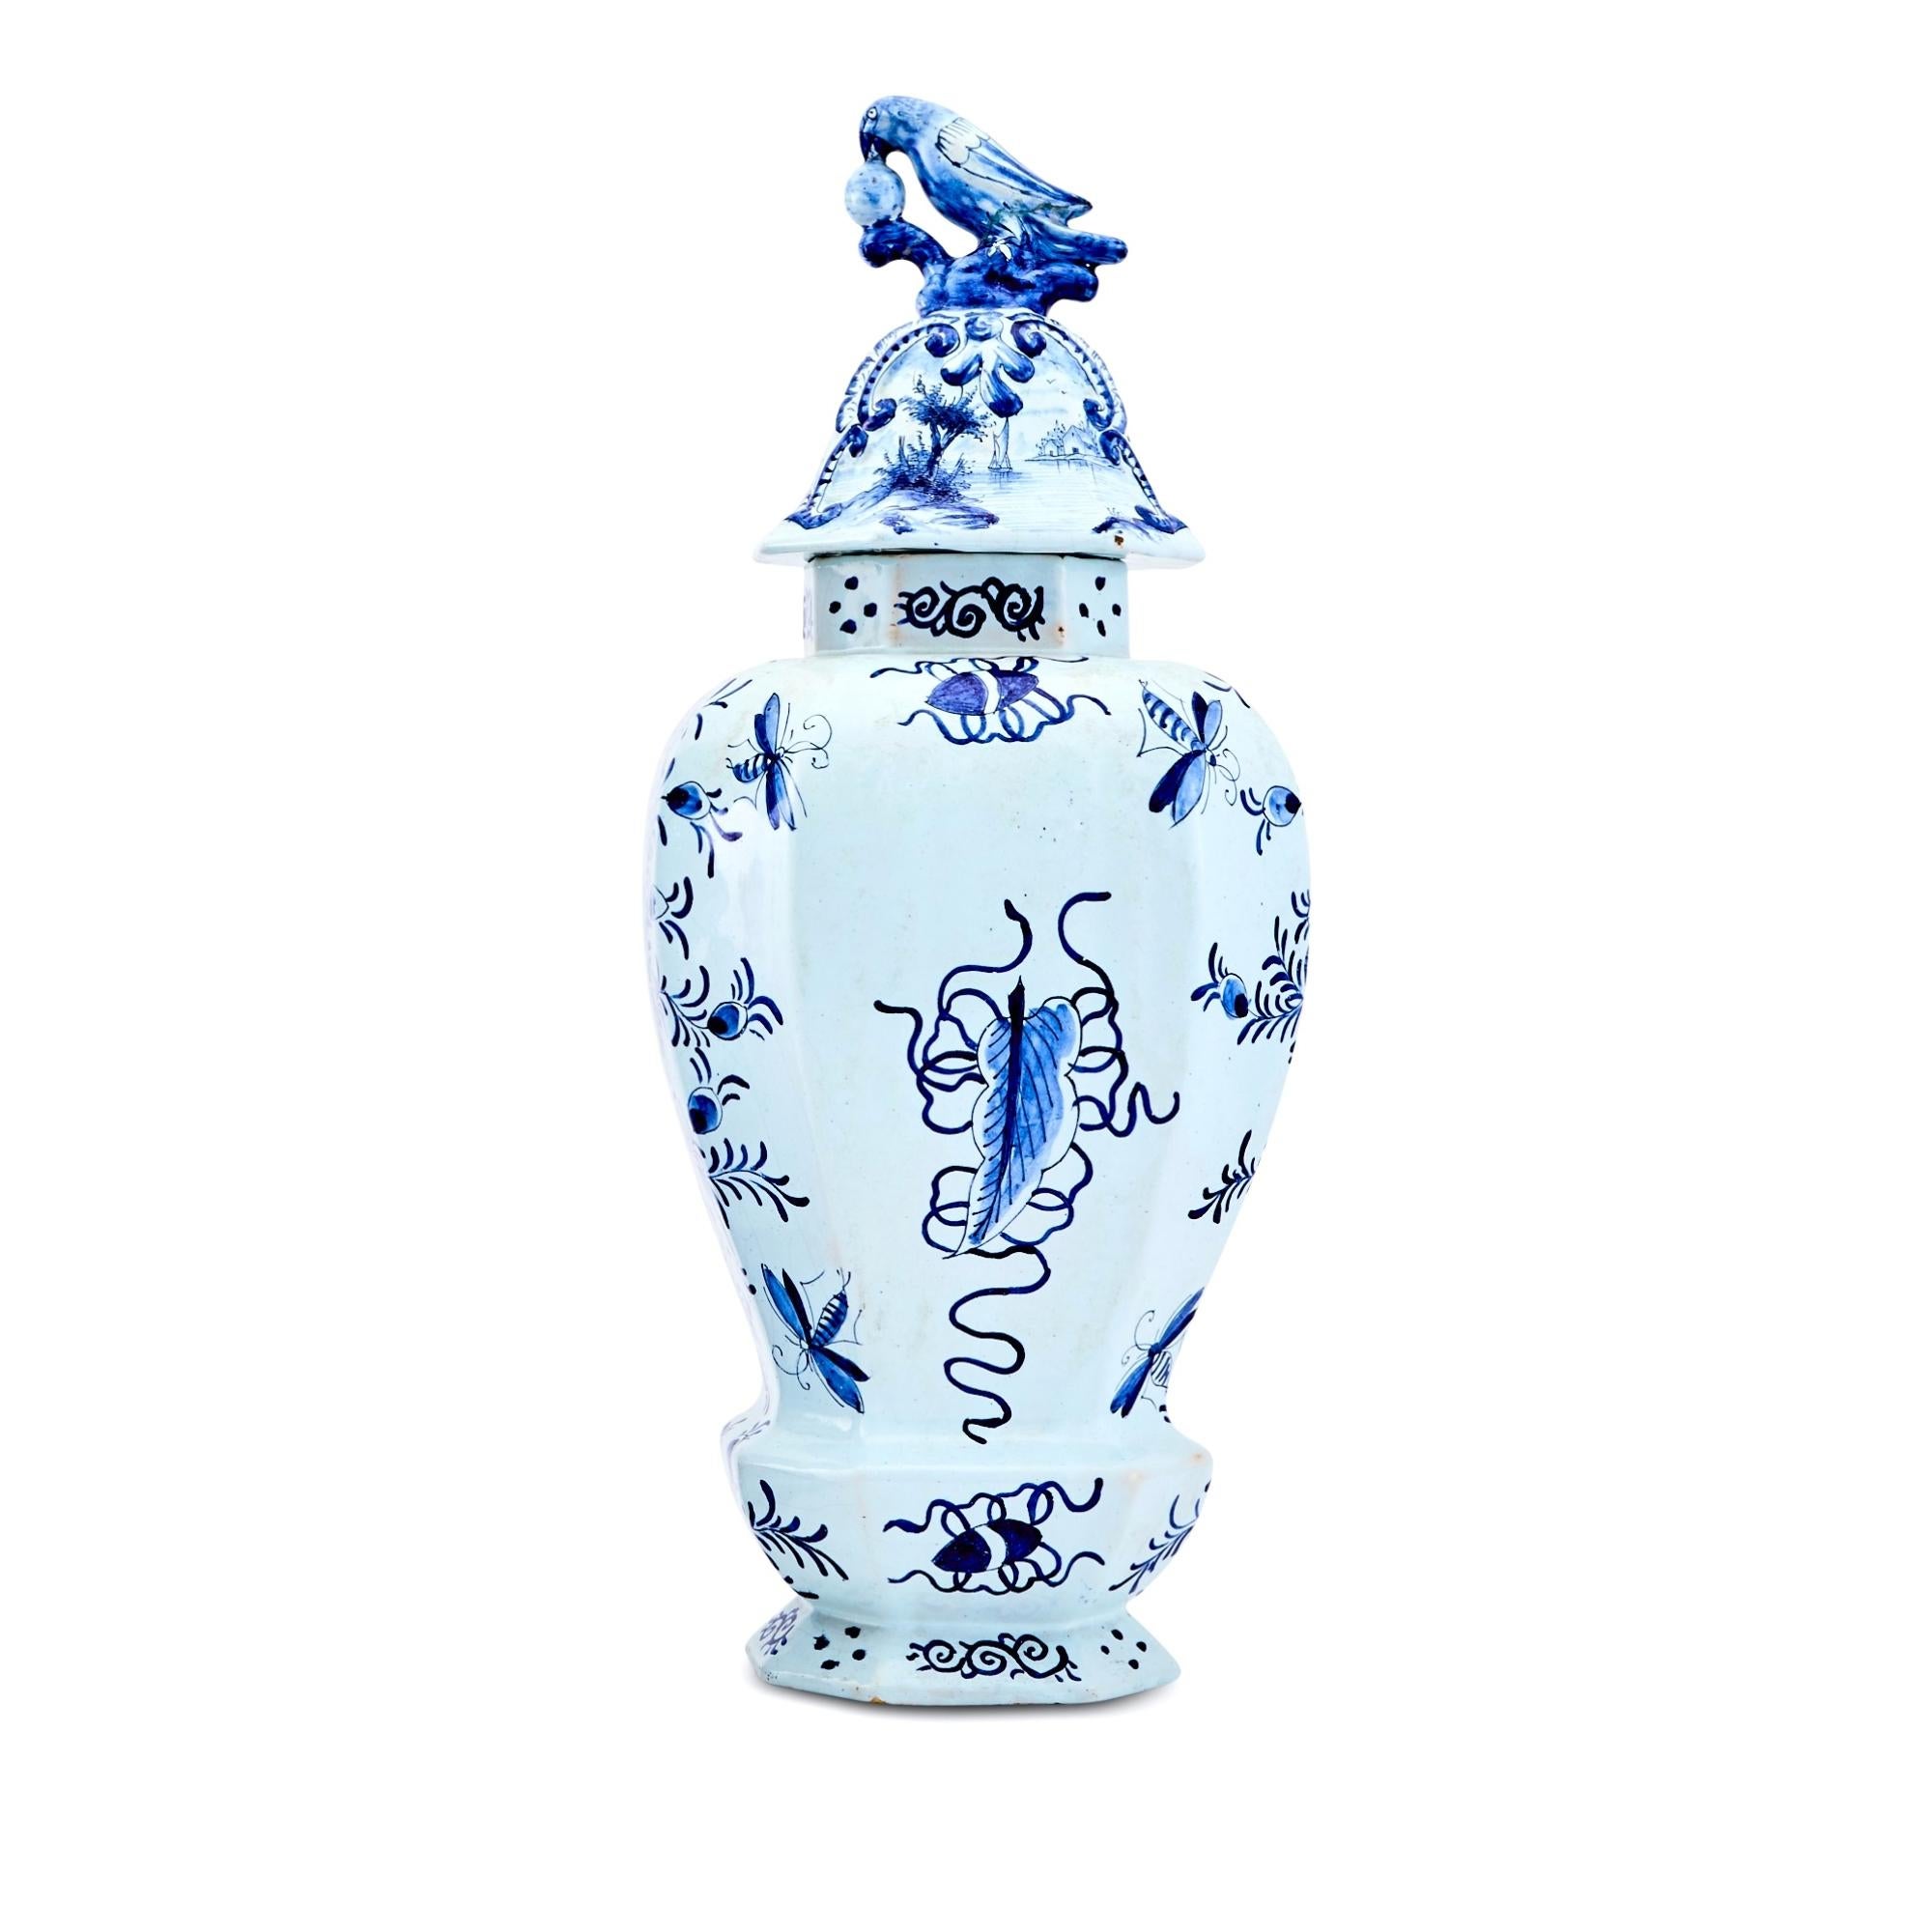 Glazed User Early 19th Century Dutch Delft blue and white Netherlands glazed ceramic co For Sale